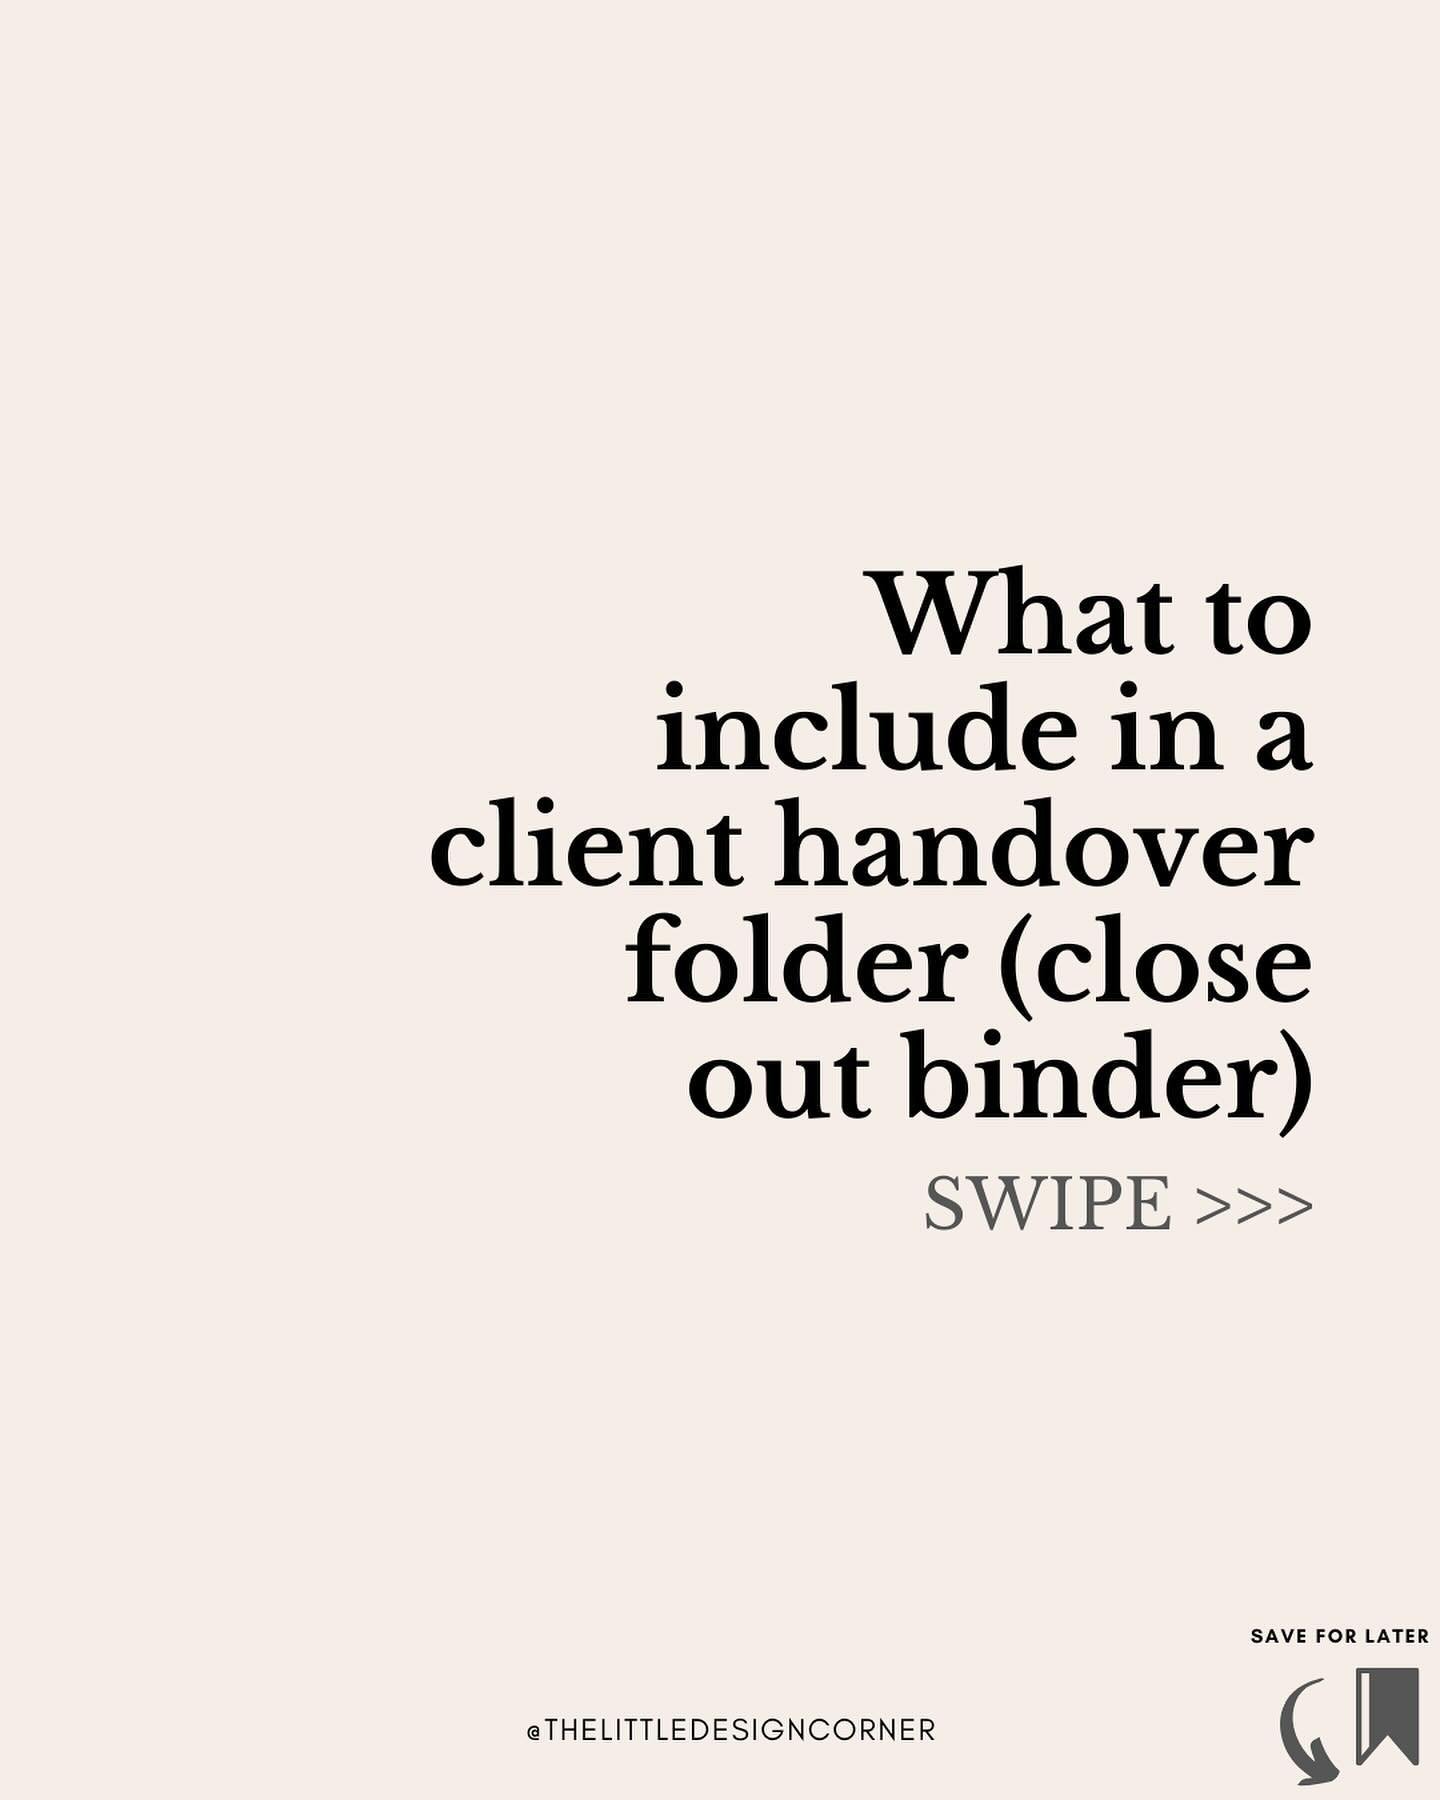 Here&rsquo;s what to include ⬇️

Once a design project is finished don&rsquo;t just walk out the door and leave your clients wondering how to make everything work in their new home. ⁠
⁠
Instead, put together a client handover folder (you might call i